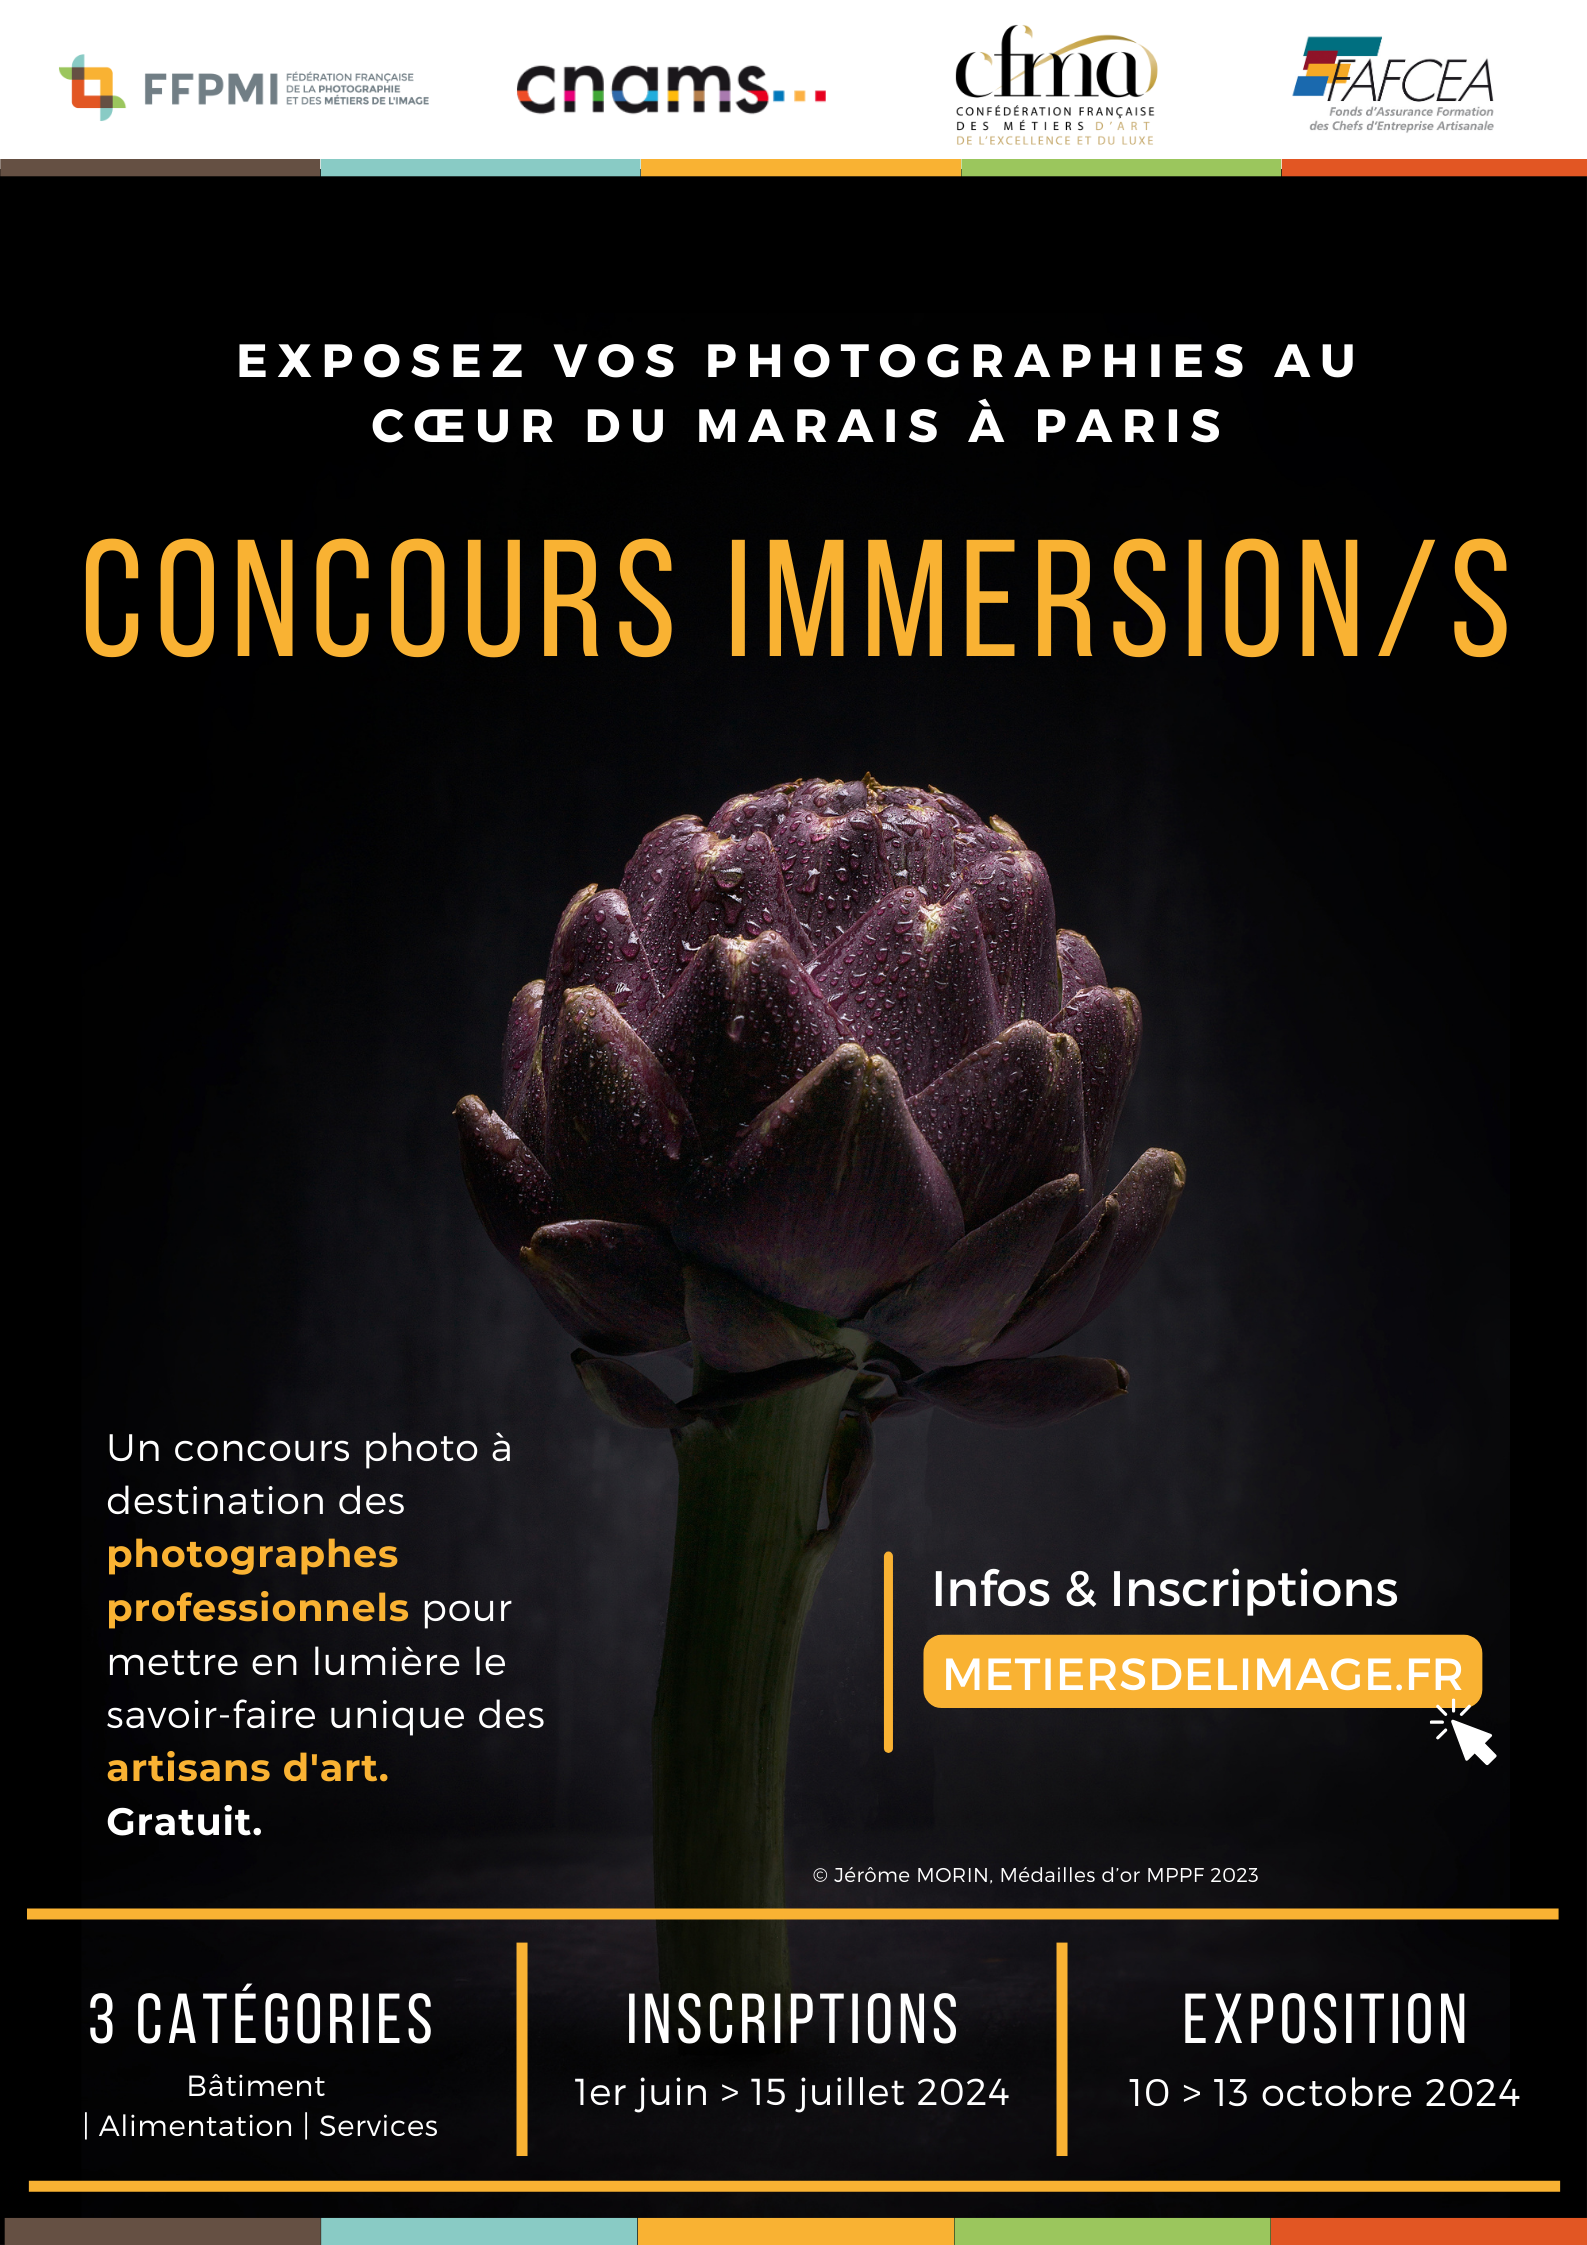 Concours Immersion/s